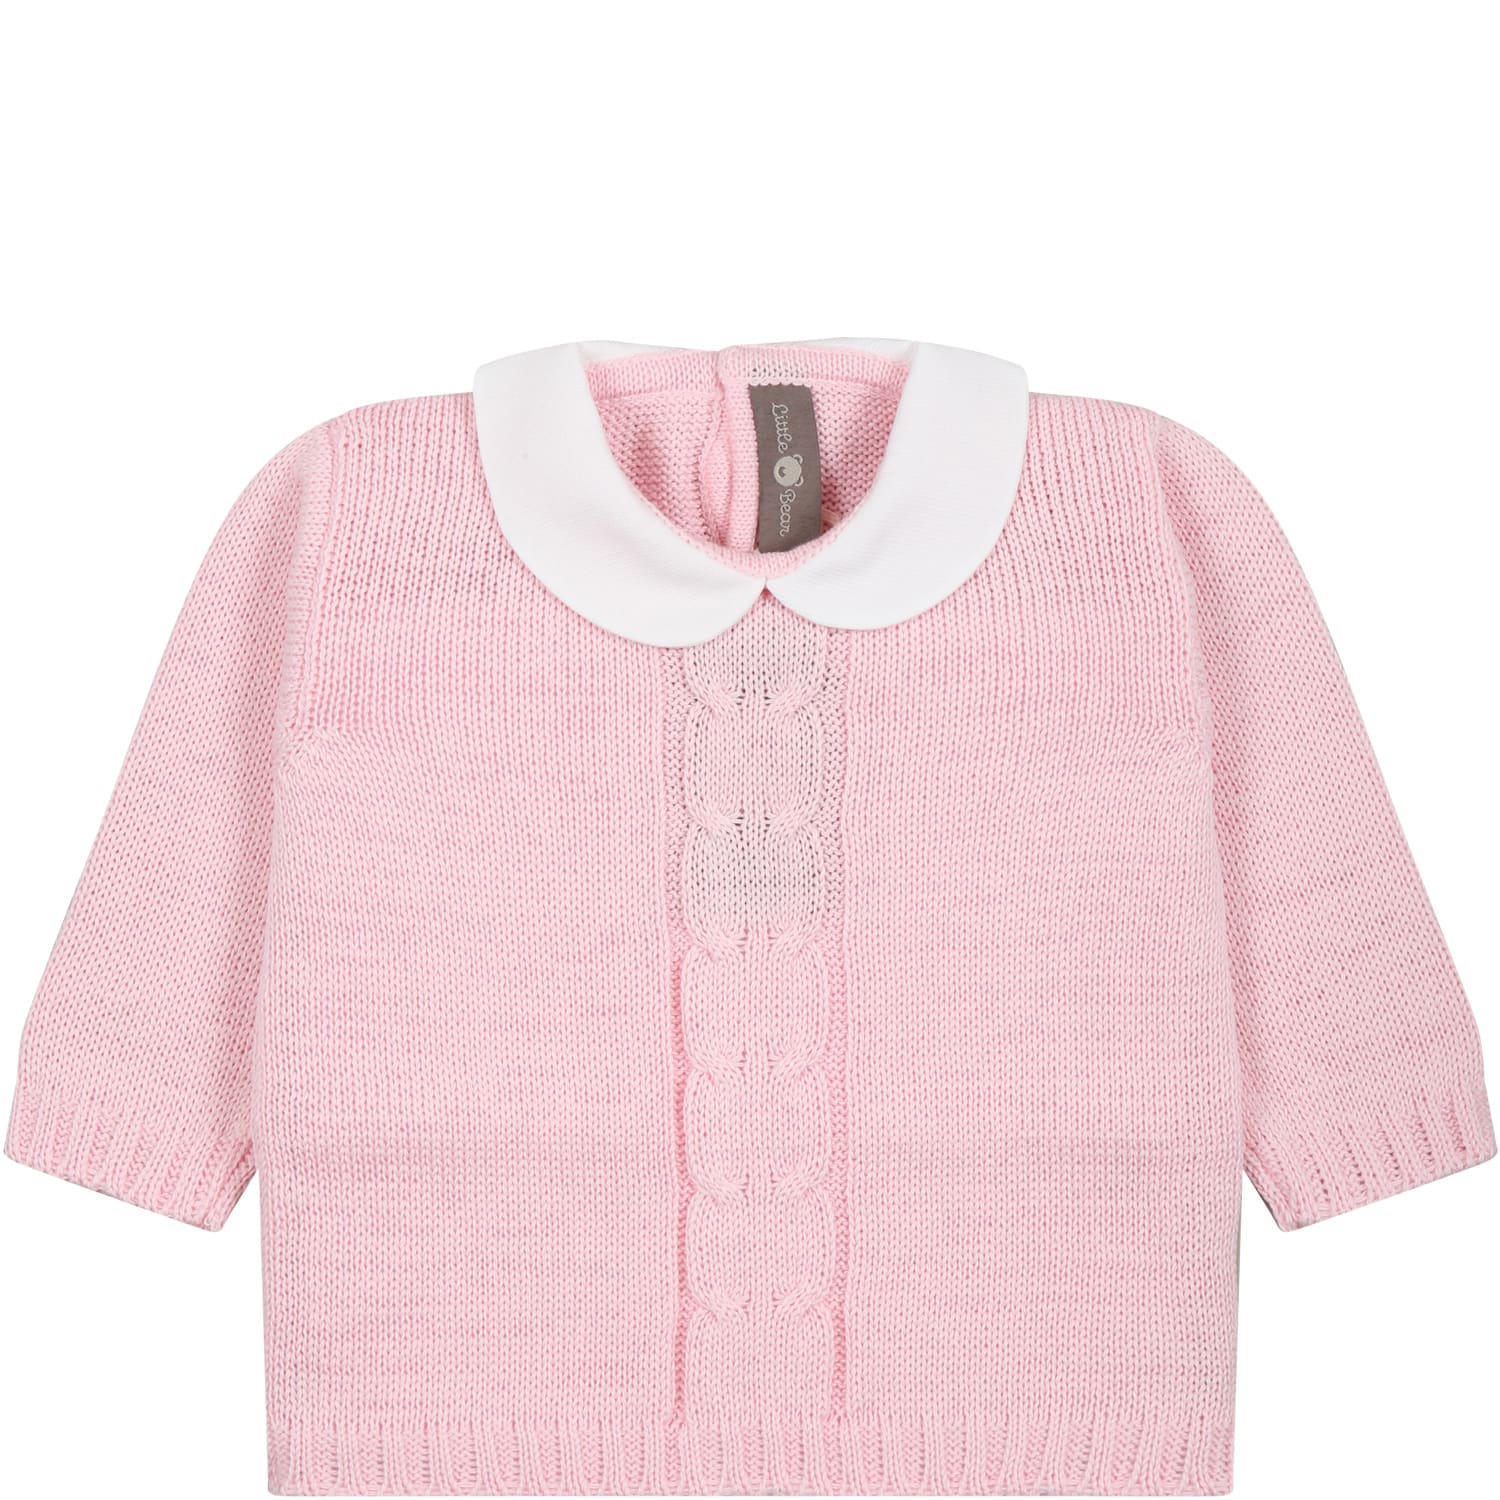 LITTLE BEAR PINK SWEATER FOR BABY GIRL